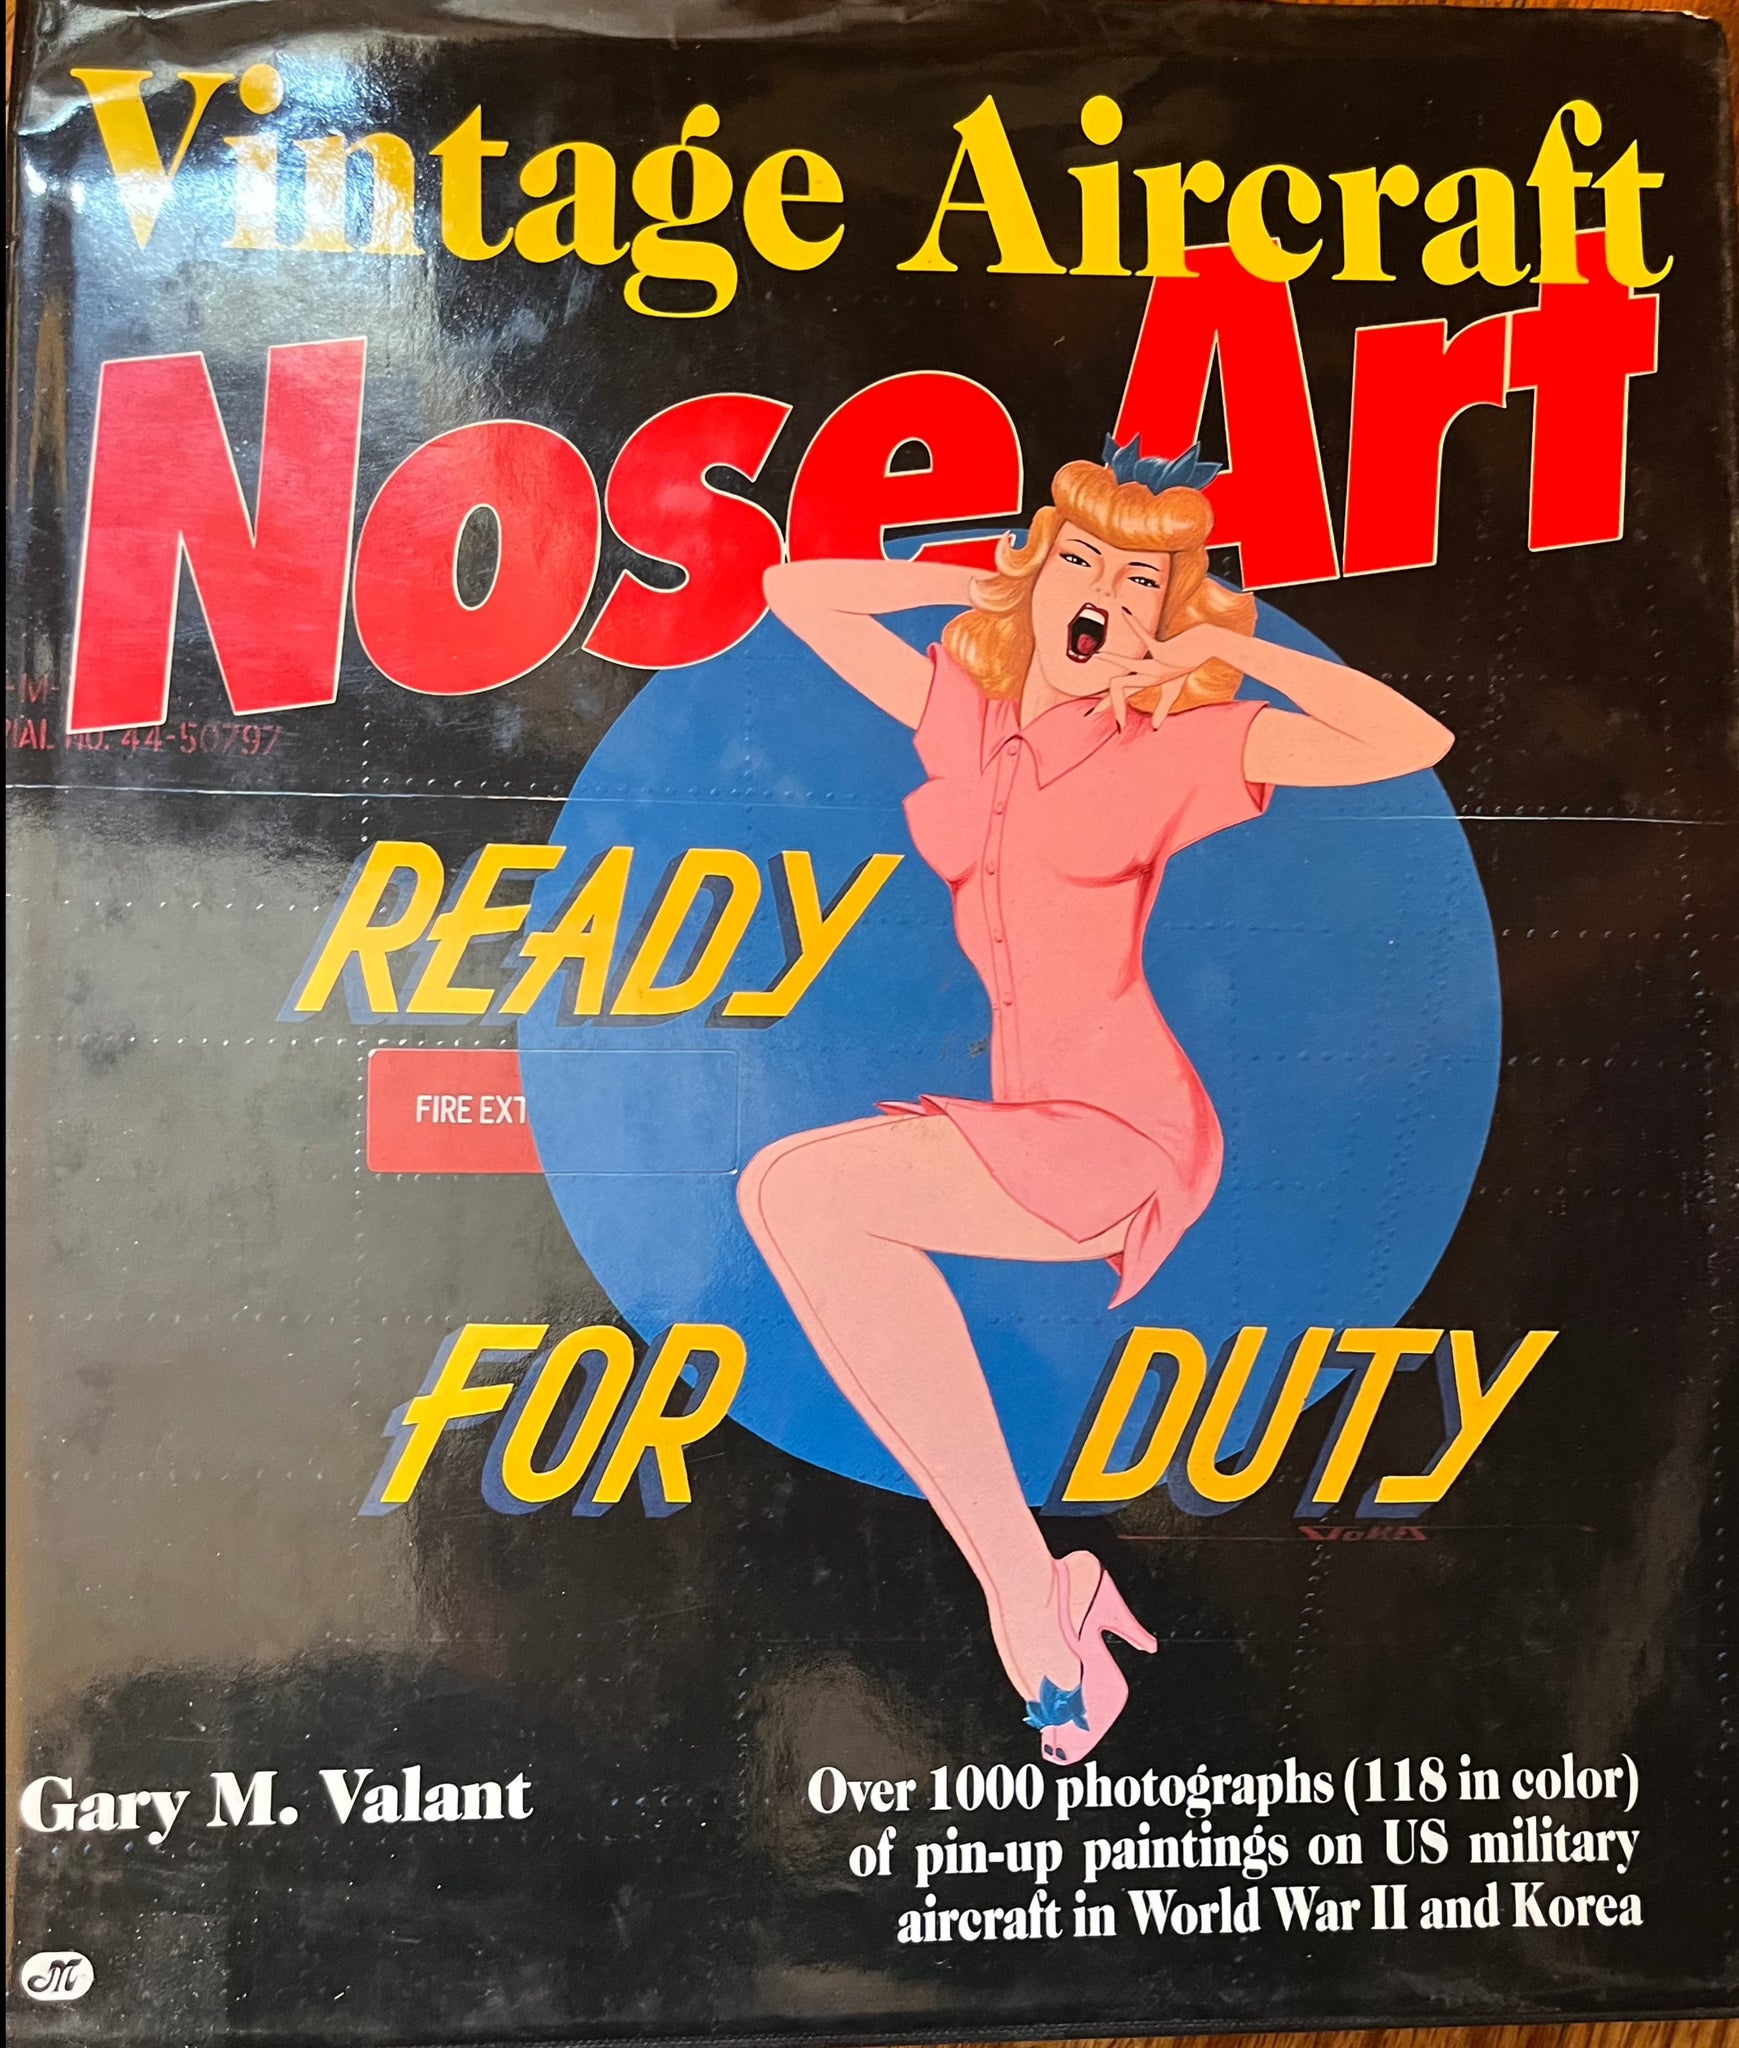 Vintage Aircraft Nose Art: Over 1000 Photographs of Pin-Up Paintings on USA Military Aircraft in World War 2 and Korea